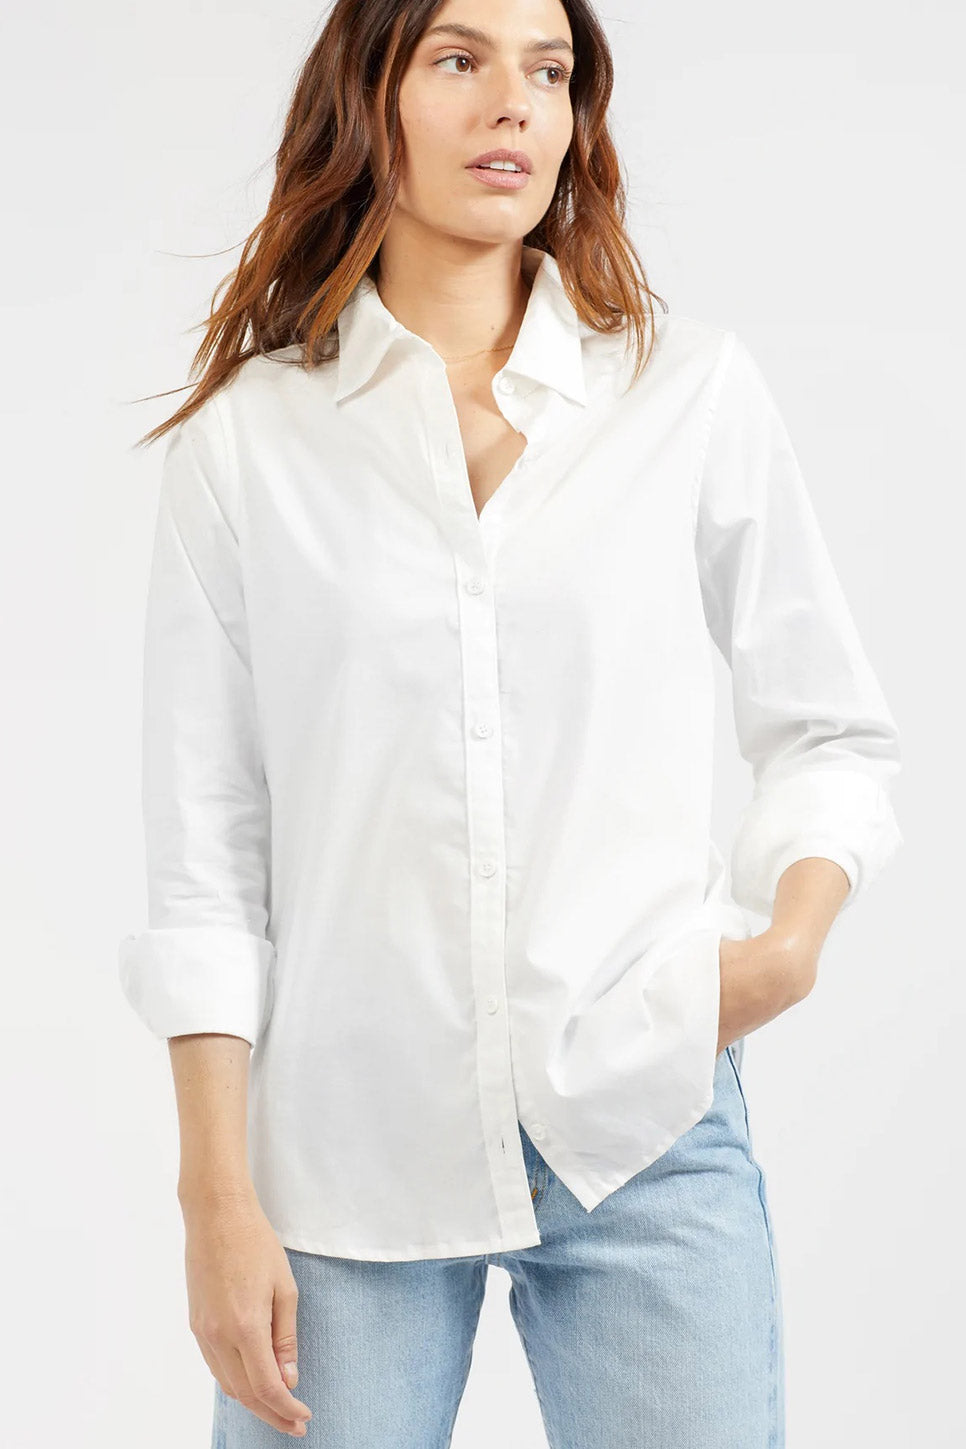 Outerknown - Marlow Shirt - Bright White - Profile